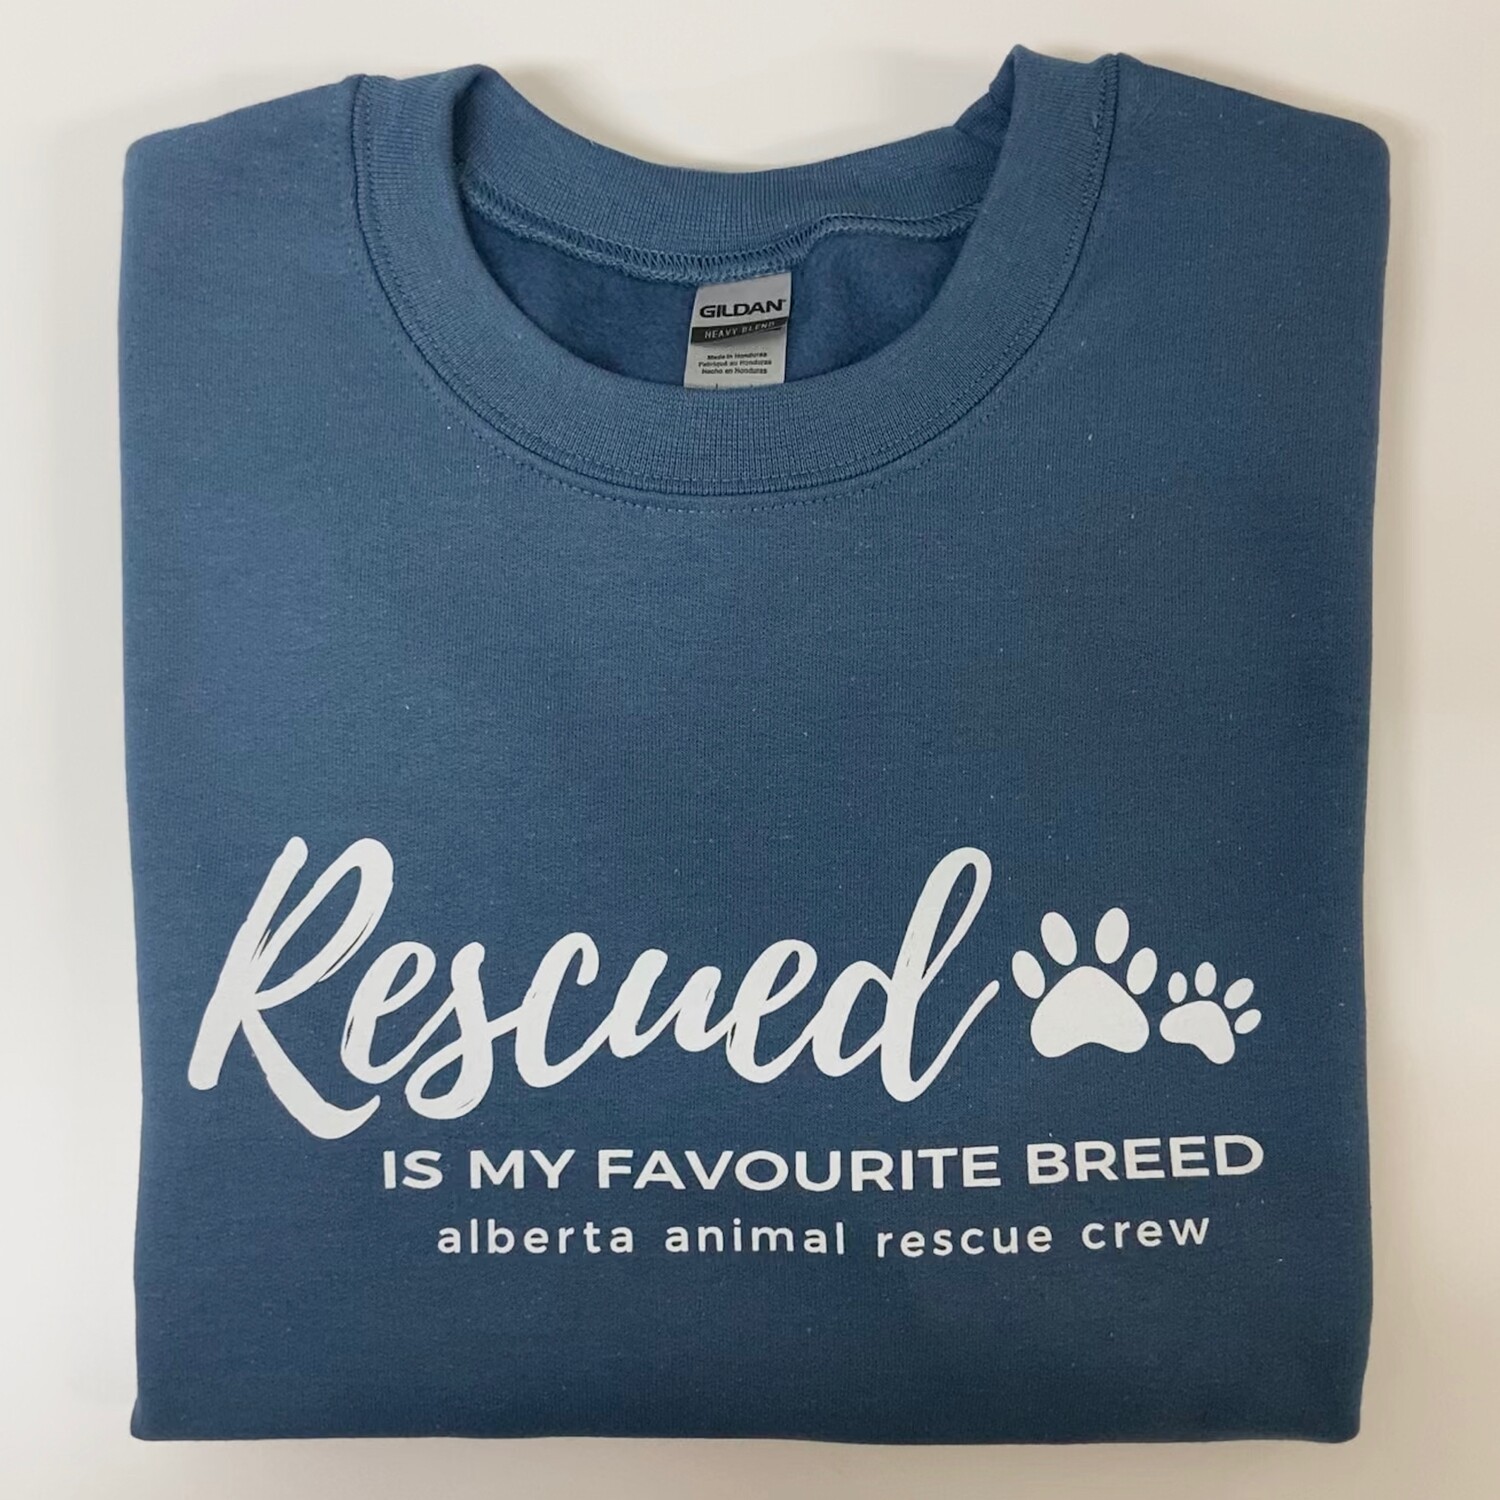 DISCONTINUED Clothing - Rescued is my Favourite Breed - Crewneck Sweater